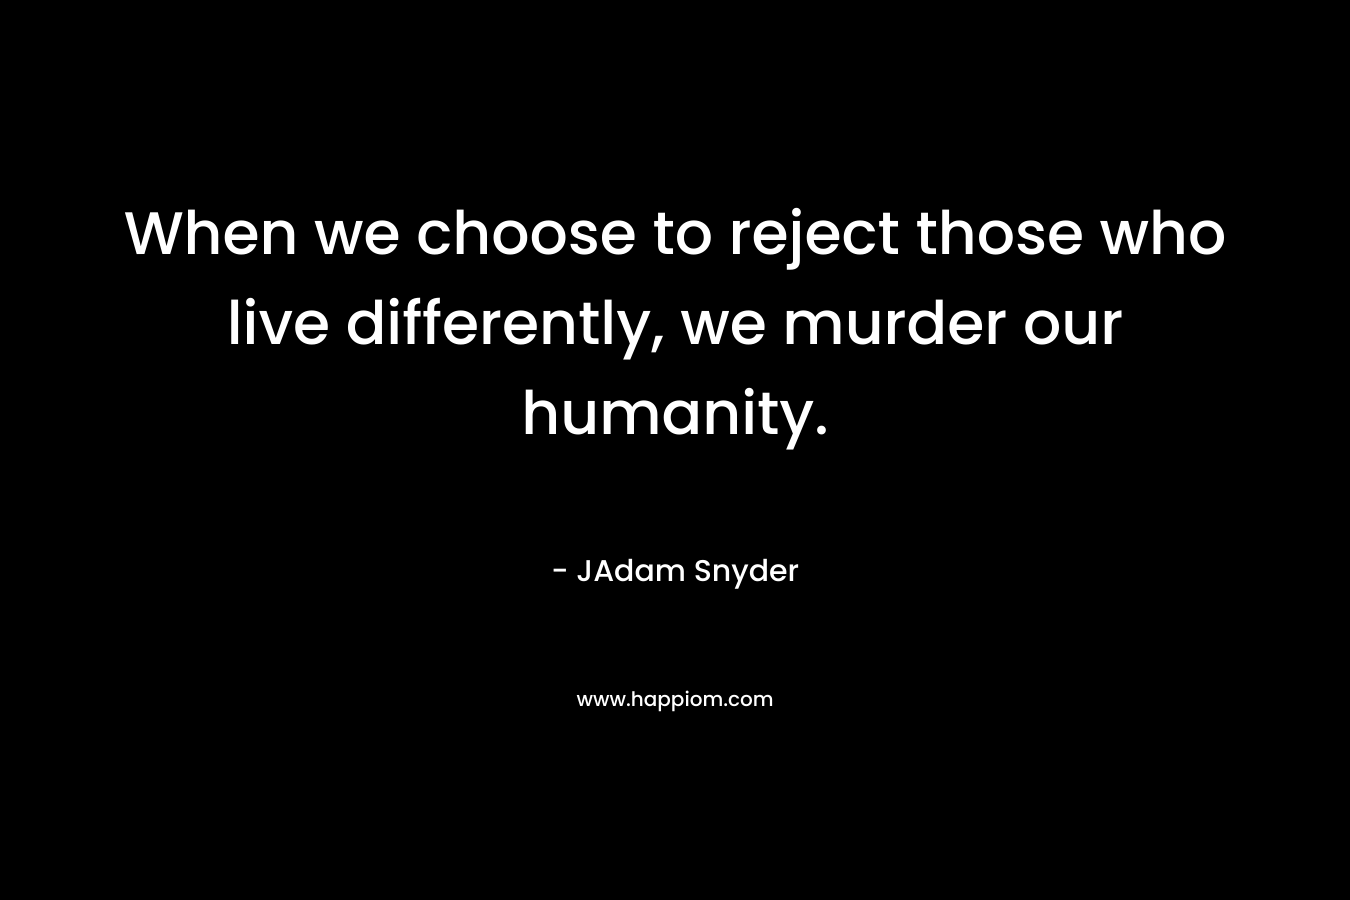 When we choose to reject those who live differently, we murder our humanity. – JAdam Snyder